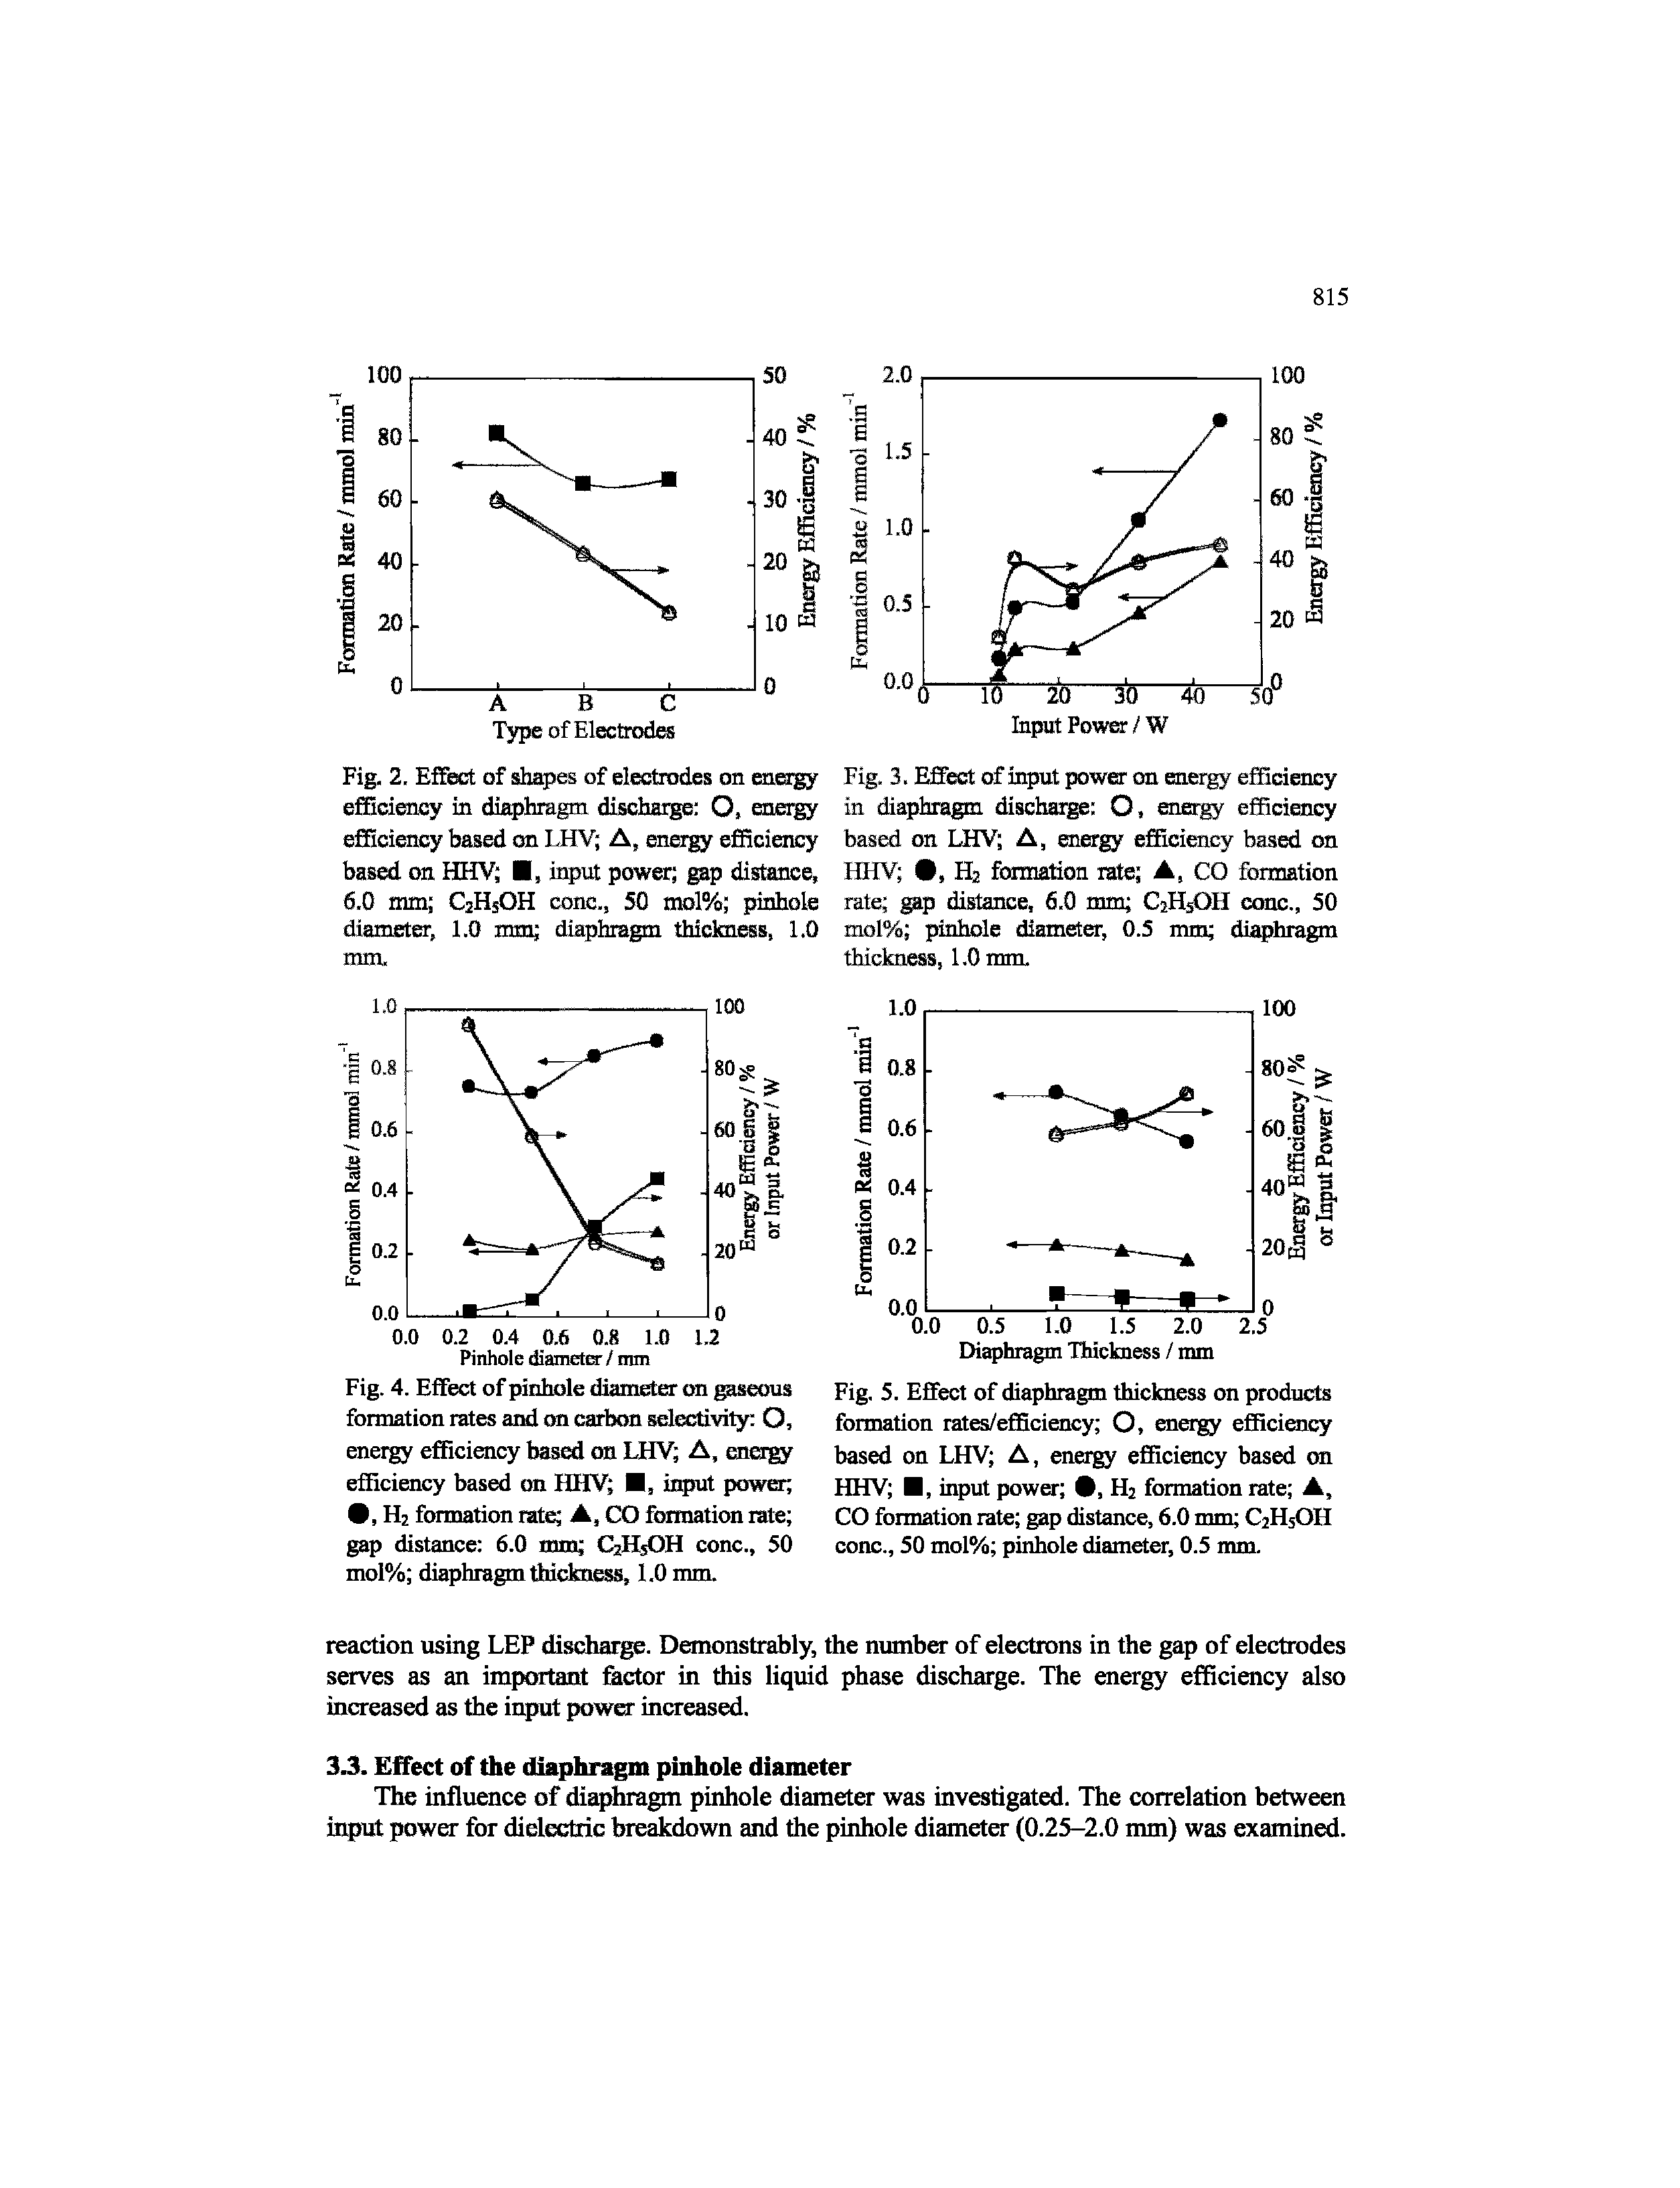 Fig. 5. Effect of diaphragm thickness on products formation rates/efficiency O, energy efficiency based on LHV A, energy efficiency based on HHV , input power 9, H2 formation rate A, CO formation rate gap distance, 6.0 mm C2H5OH cone., 50 mol% pinhole diameter, 0.5 mm.